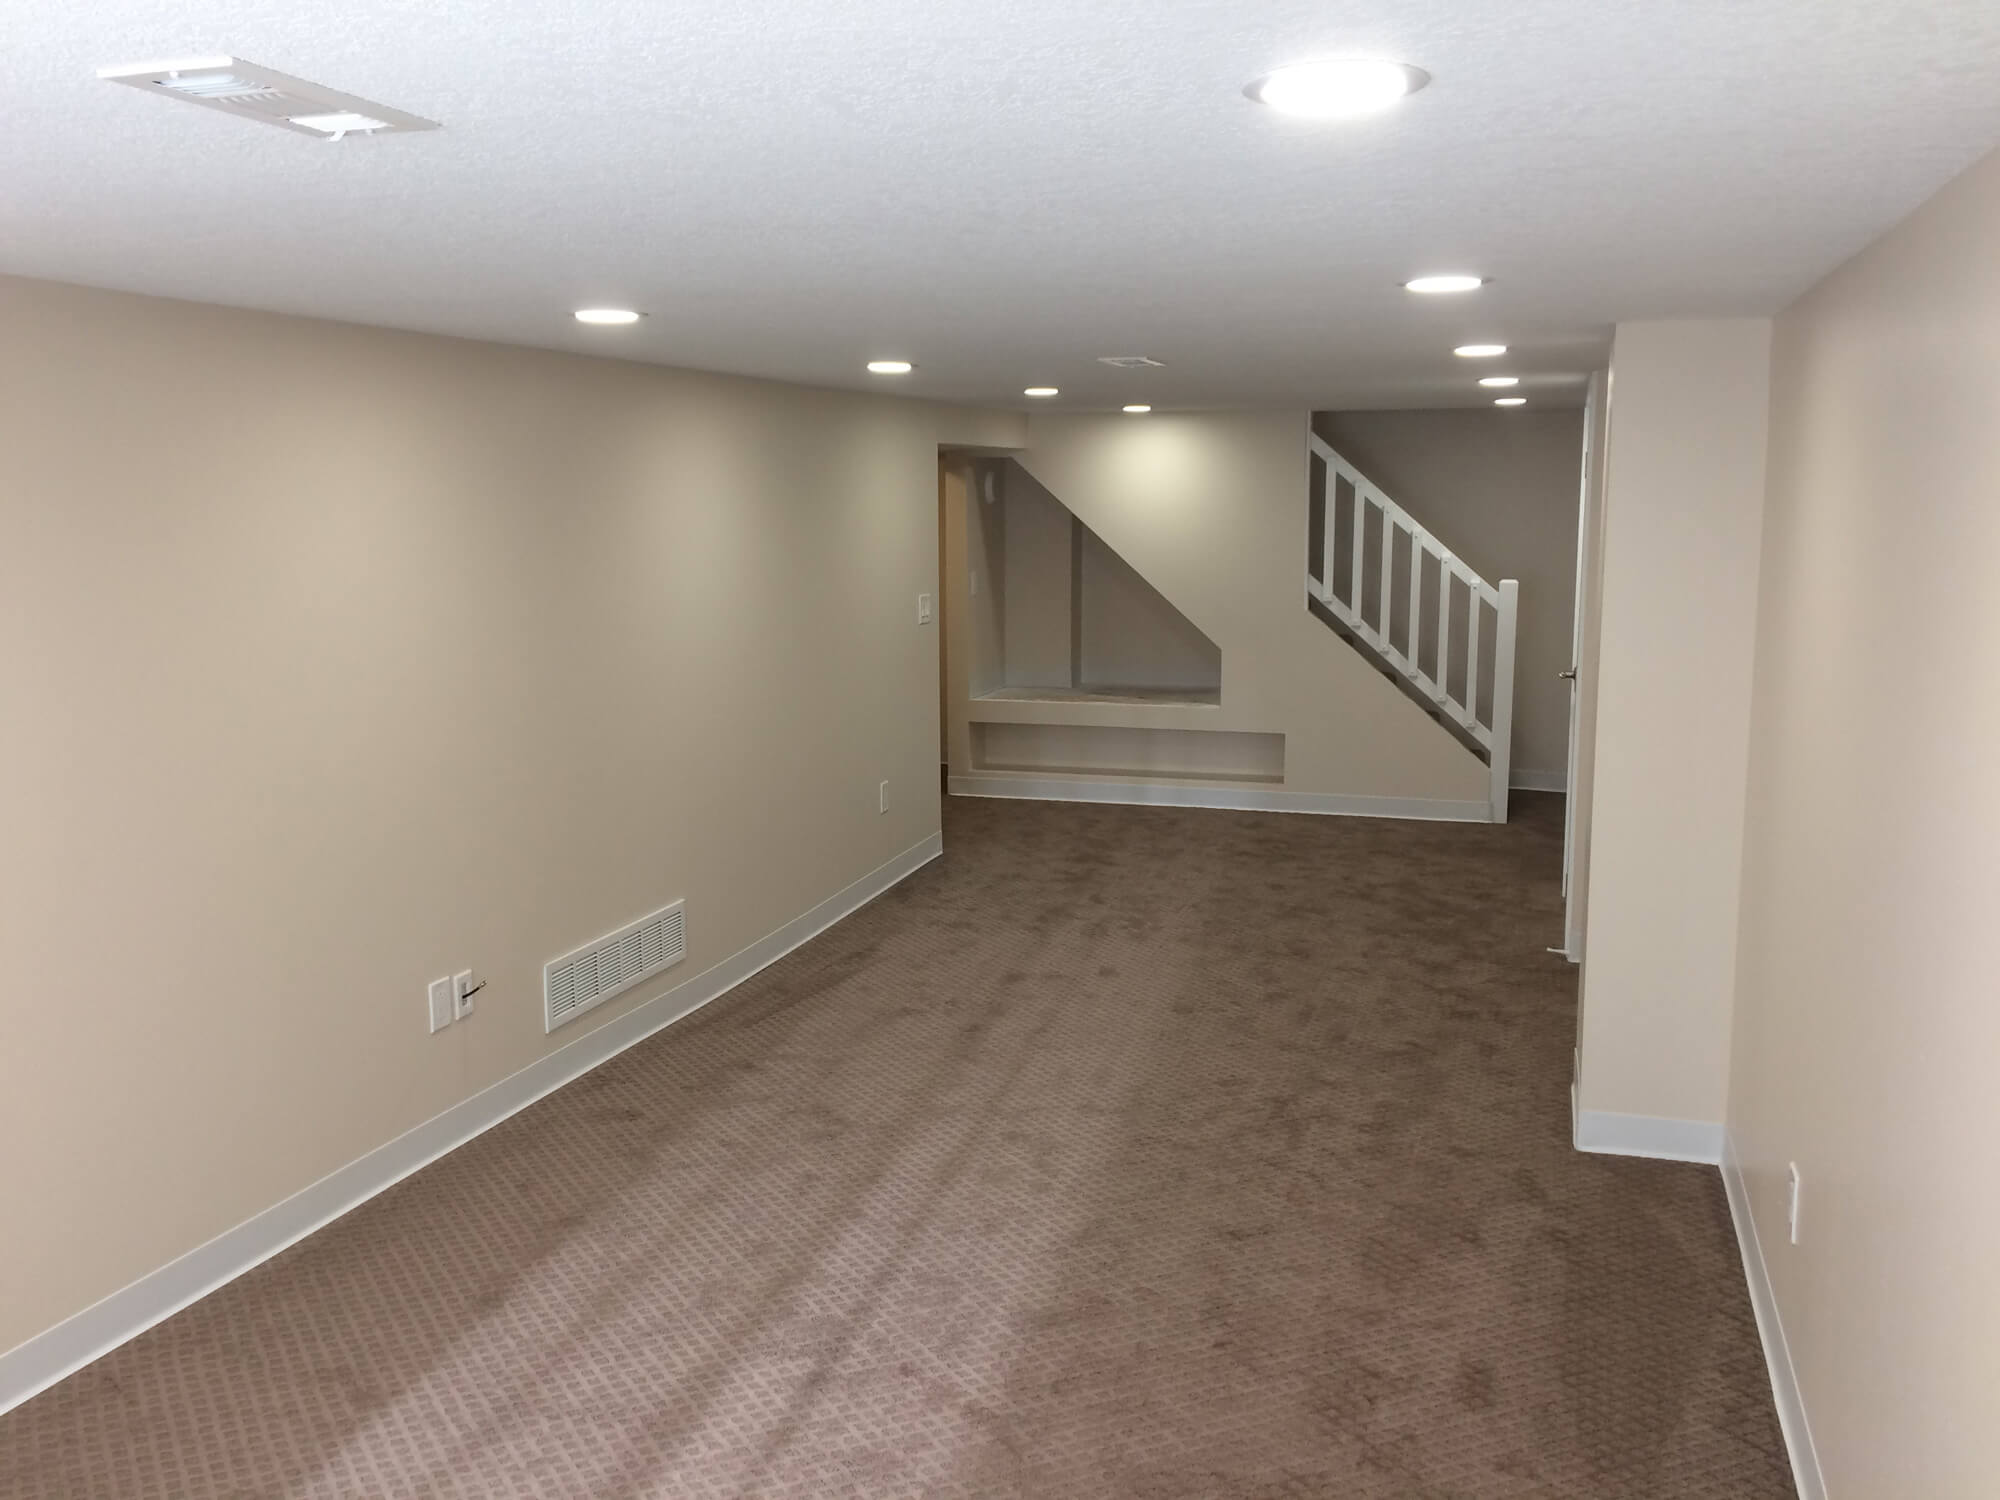 Basement Remodeling by Compassion Builders of Des Moines, IA